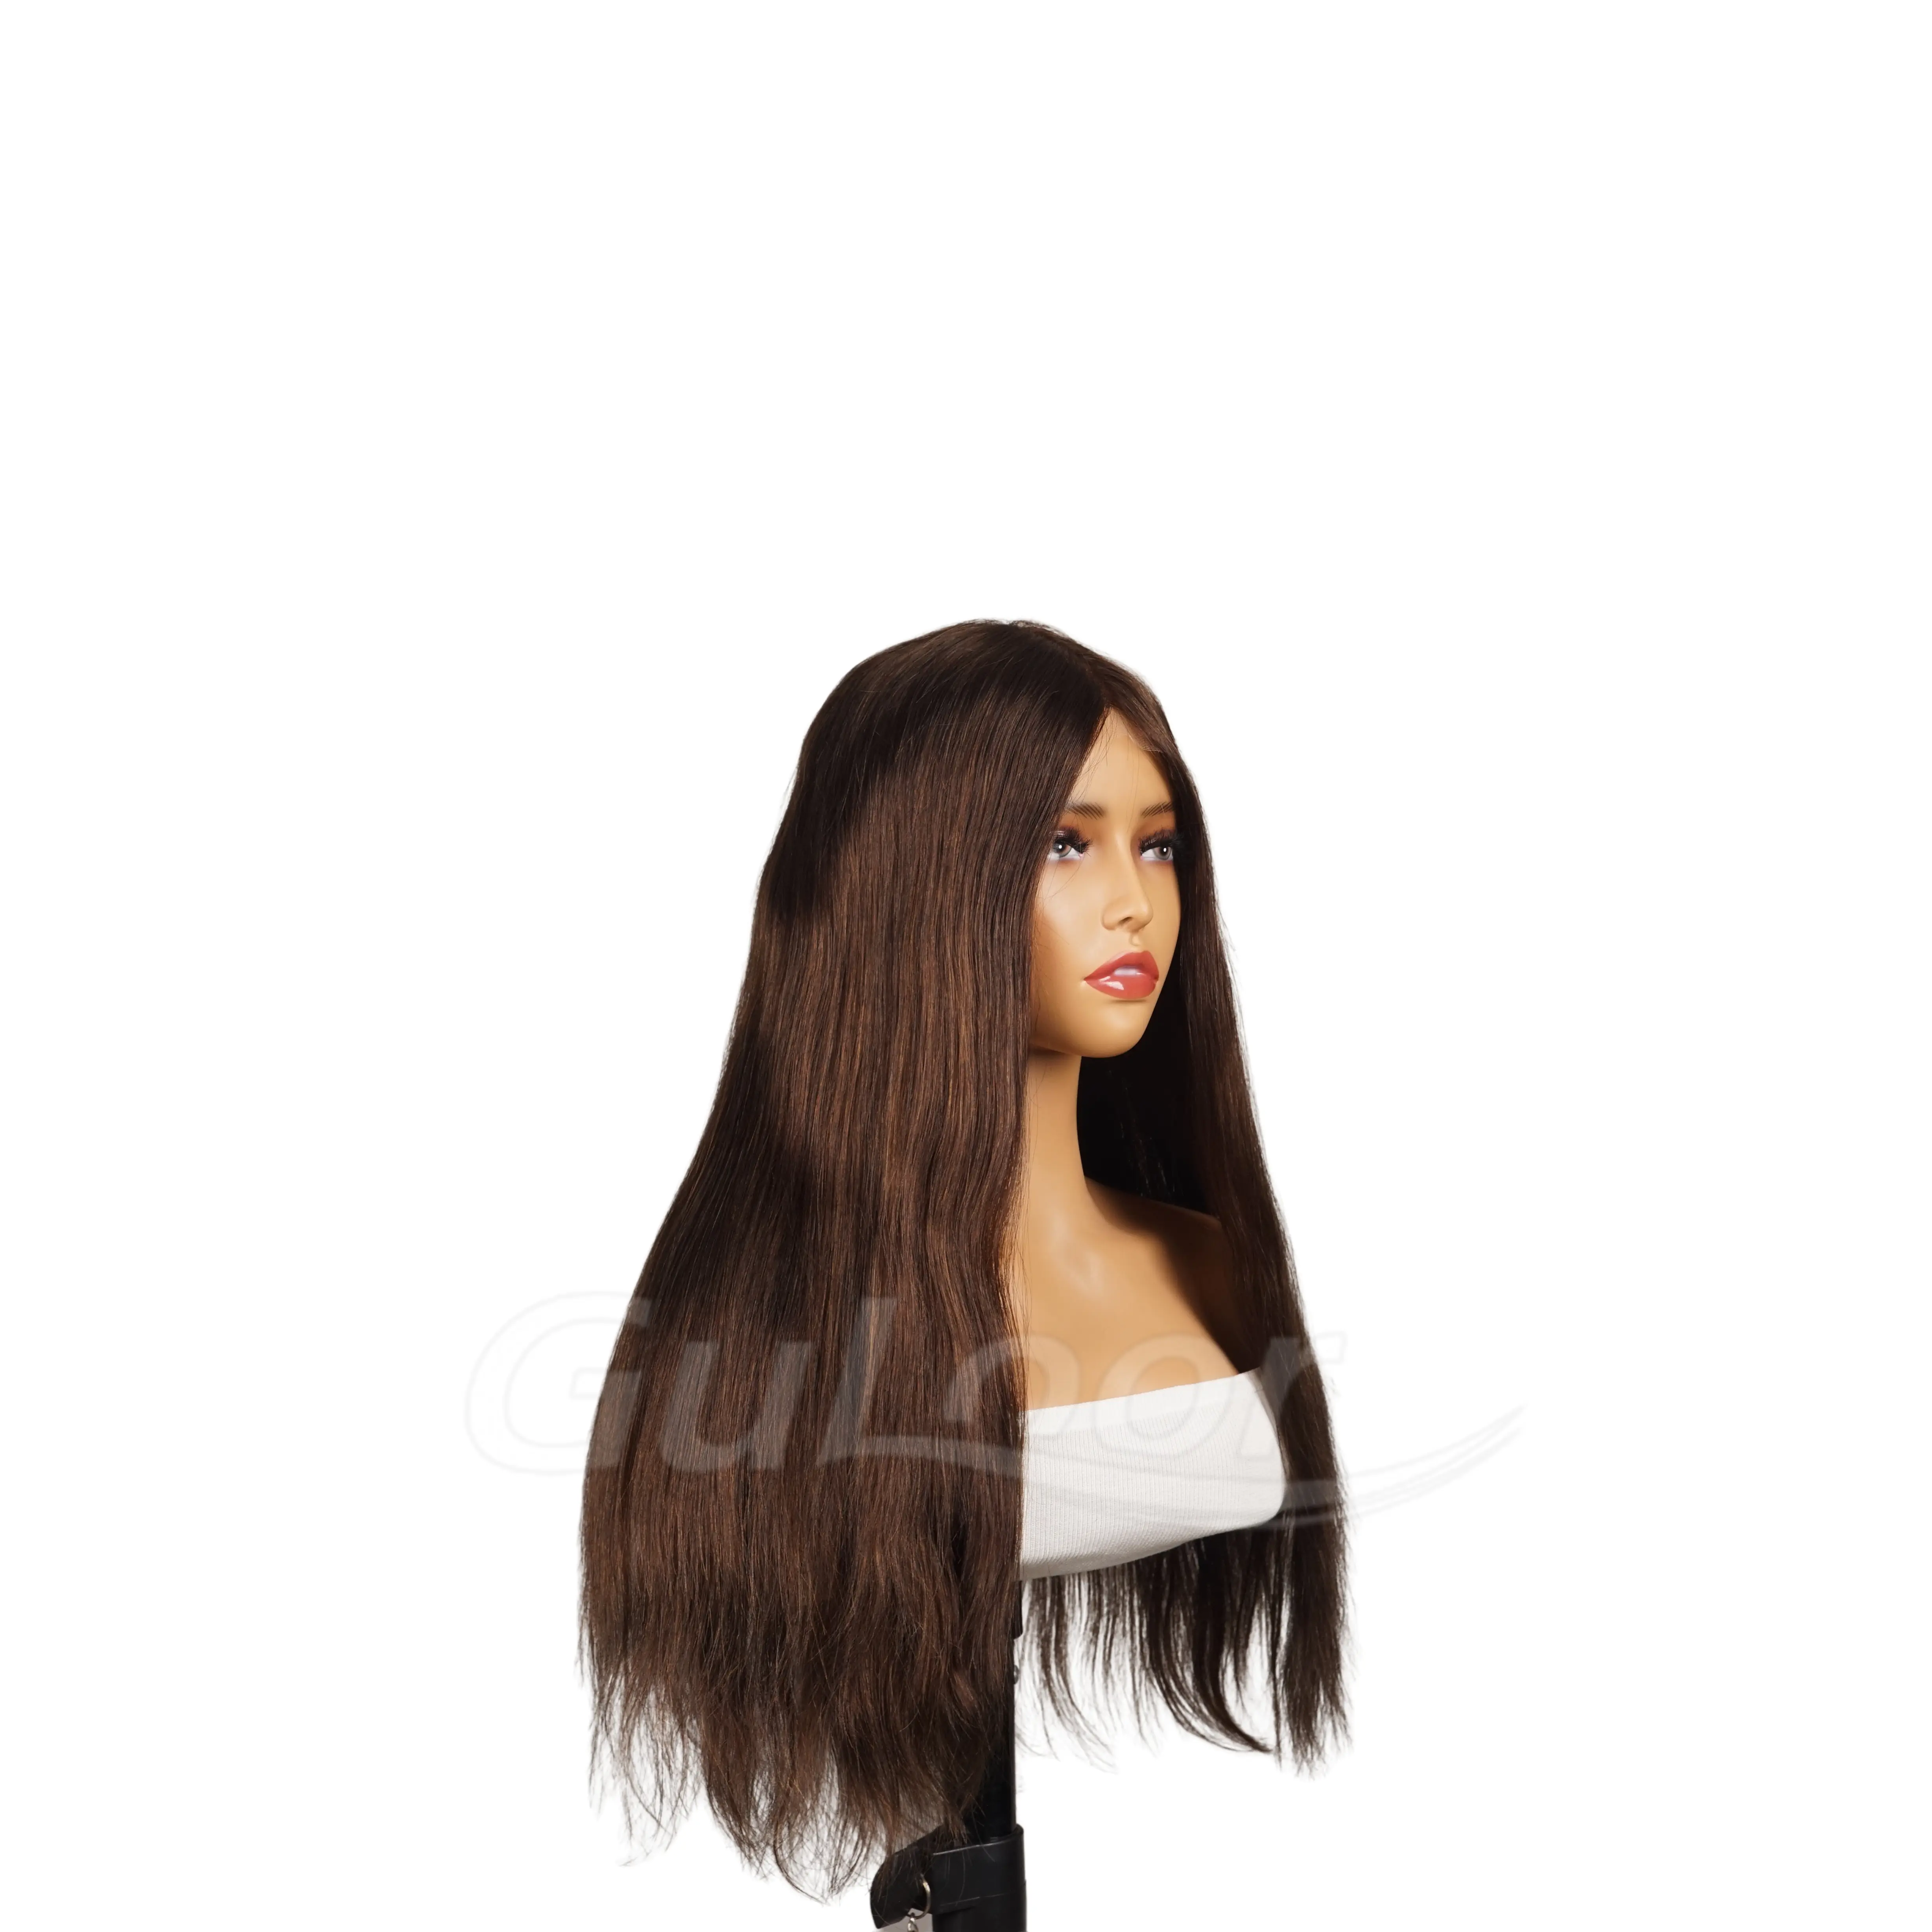 T-part lace wigs color #4 hair length 24inches